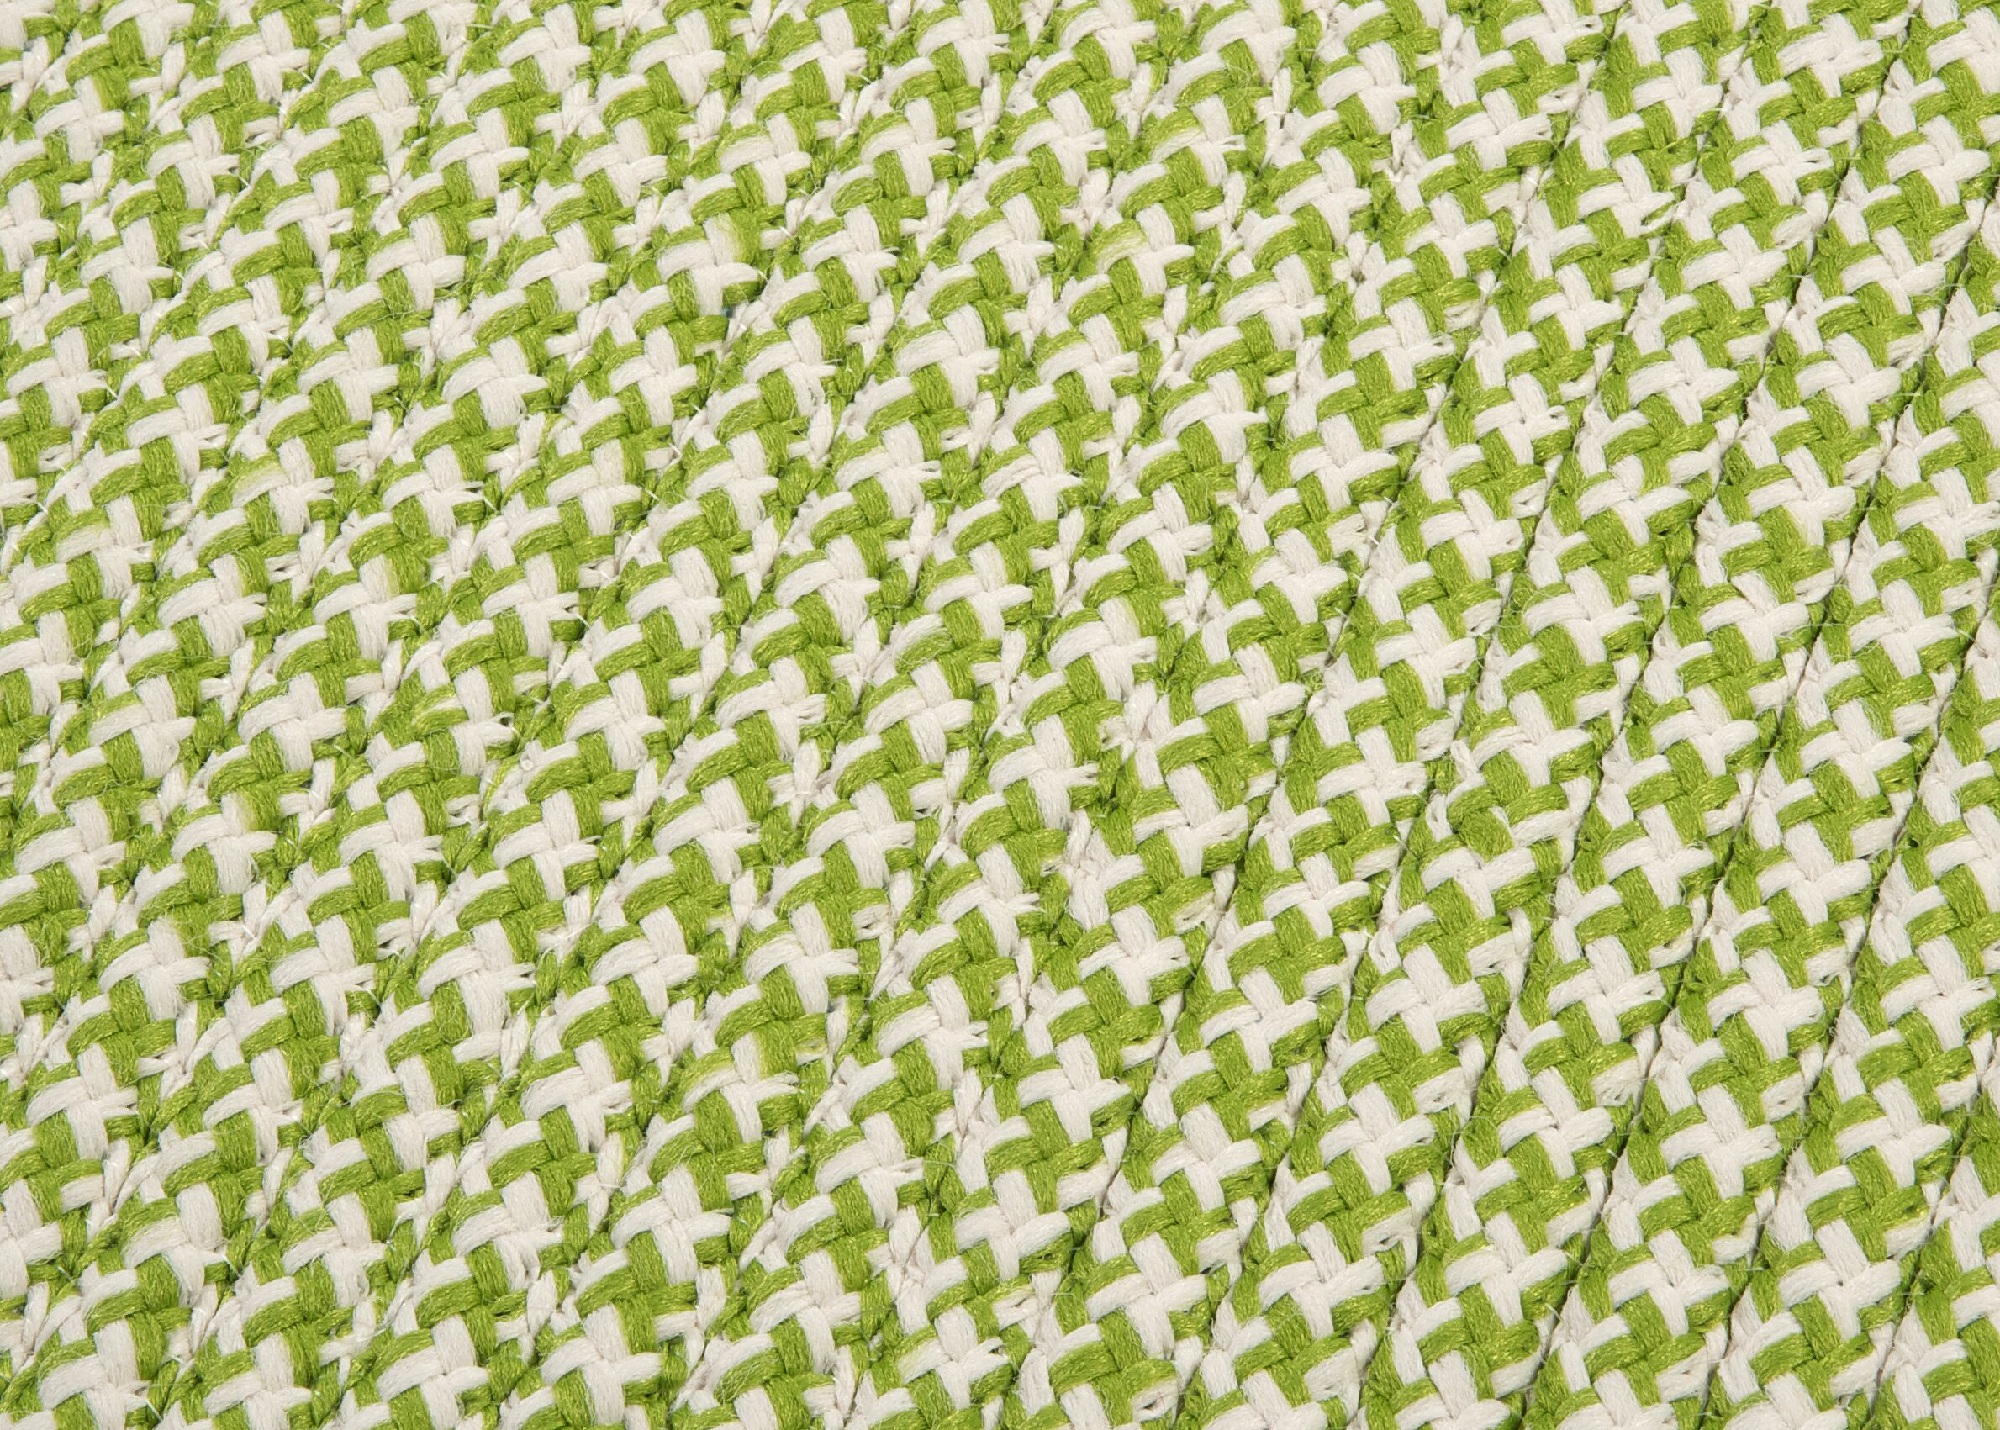 Colonial Mills Outdoor Houndstooth Tweed - Lime 8'x11' - image 2 of 2